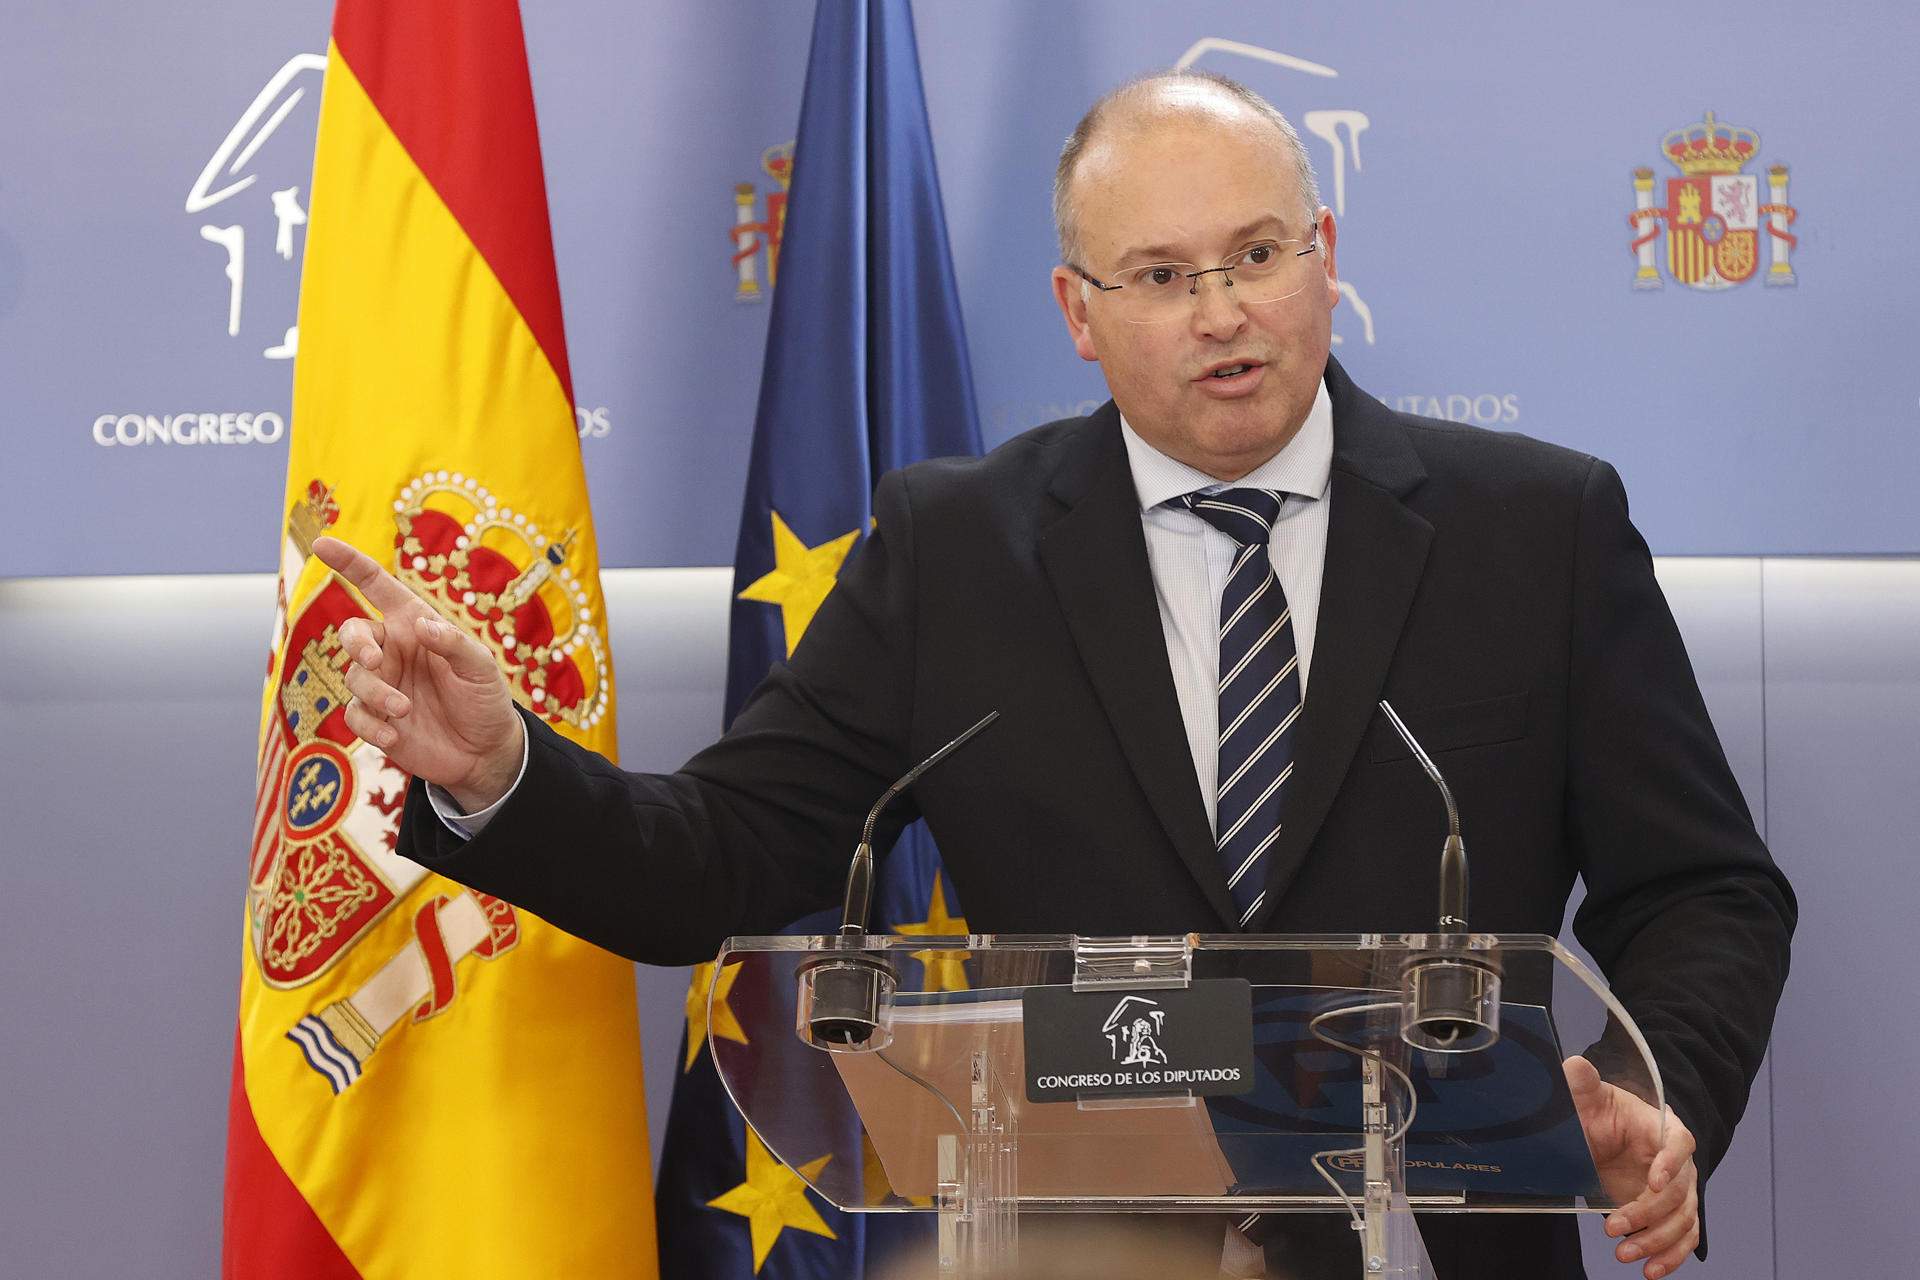 The PP now denies any Puigdemont pardon offer and accuses the PSOE of "intoxication"